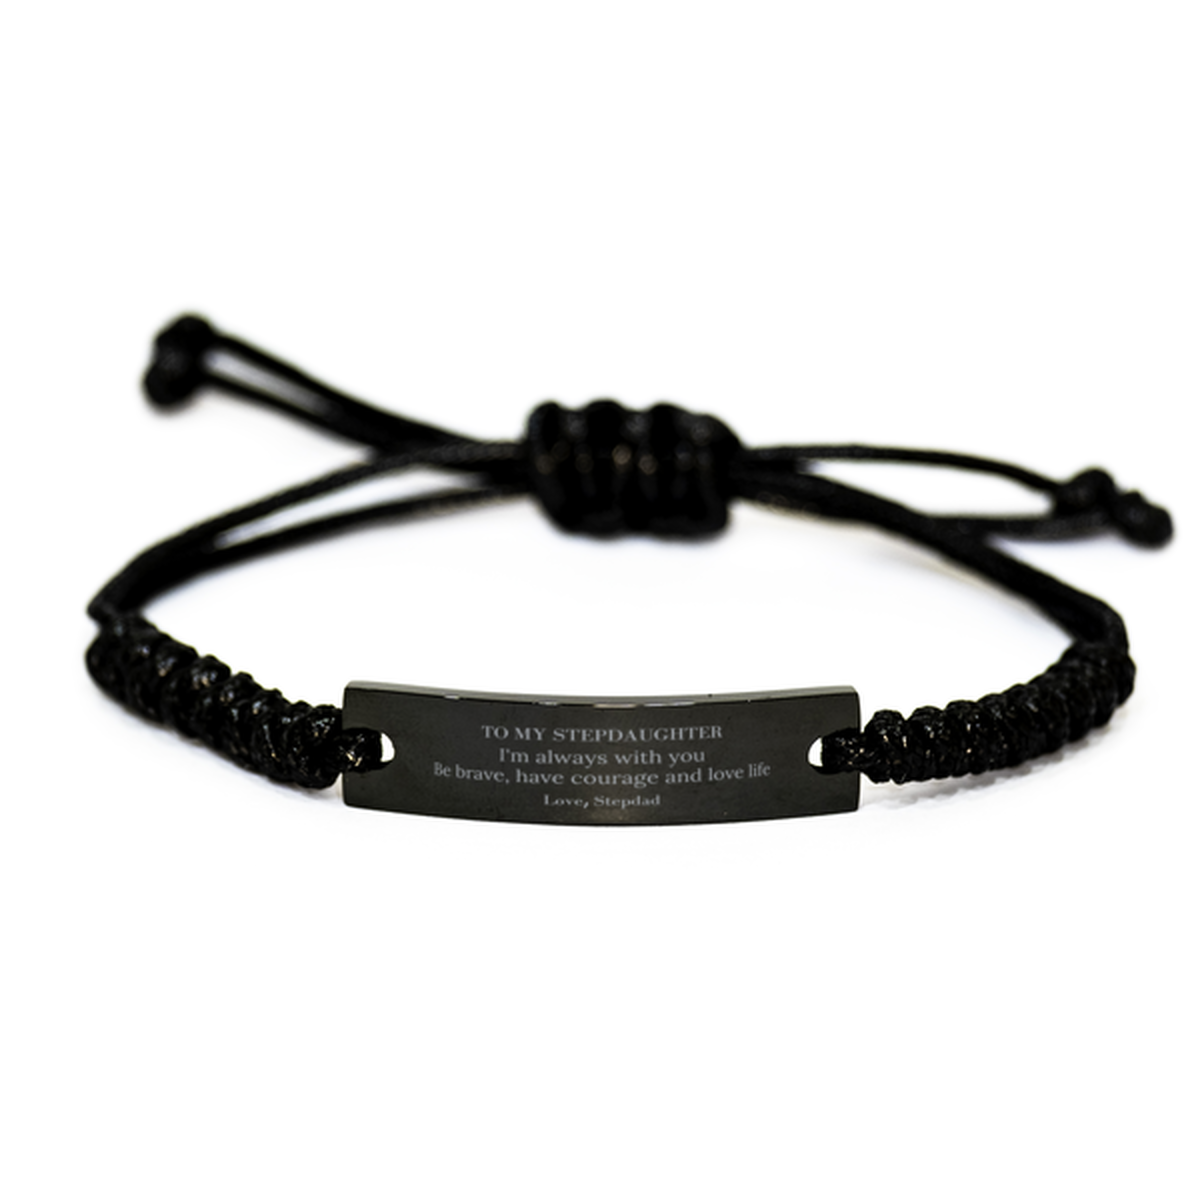 To My Stepdaughter Gifts from Stepdad, Unique Black Rope Bracelet Inspirational Christmas Birthday Graduation Gifts for Stepdaughter I'm always with you. Be brave, have courage and love life. Love, Stepdad